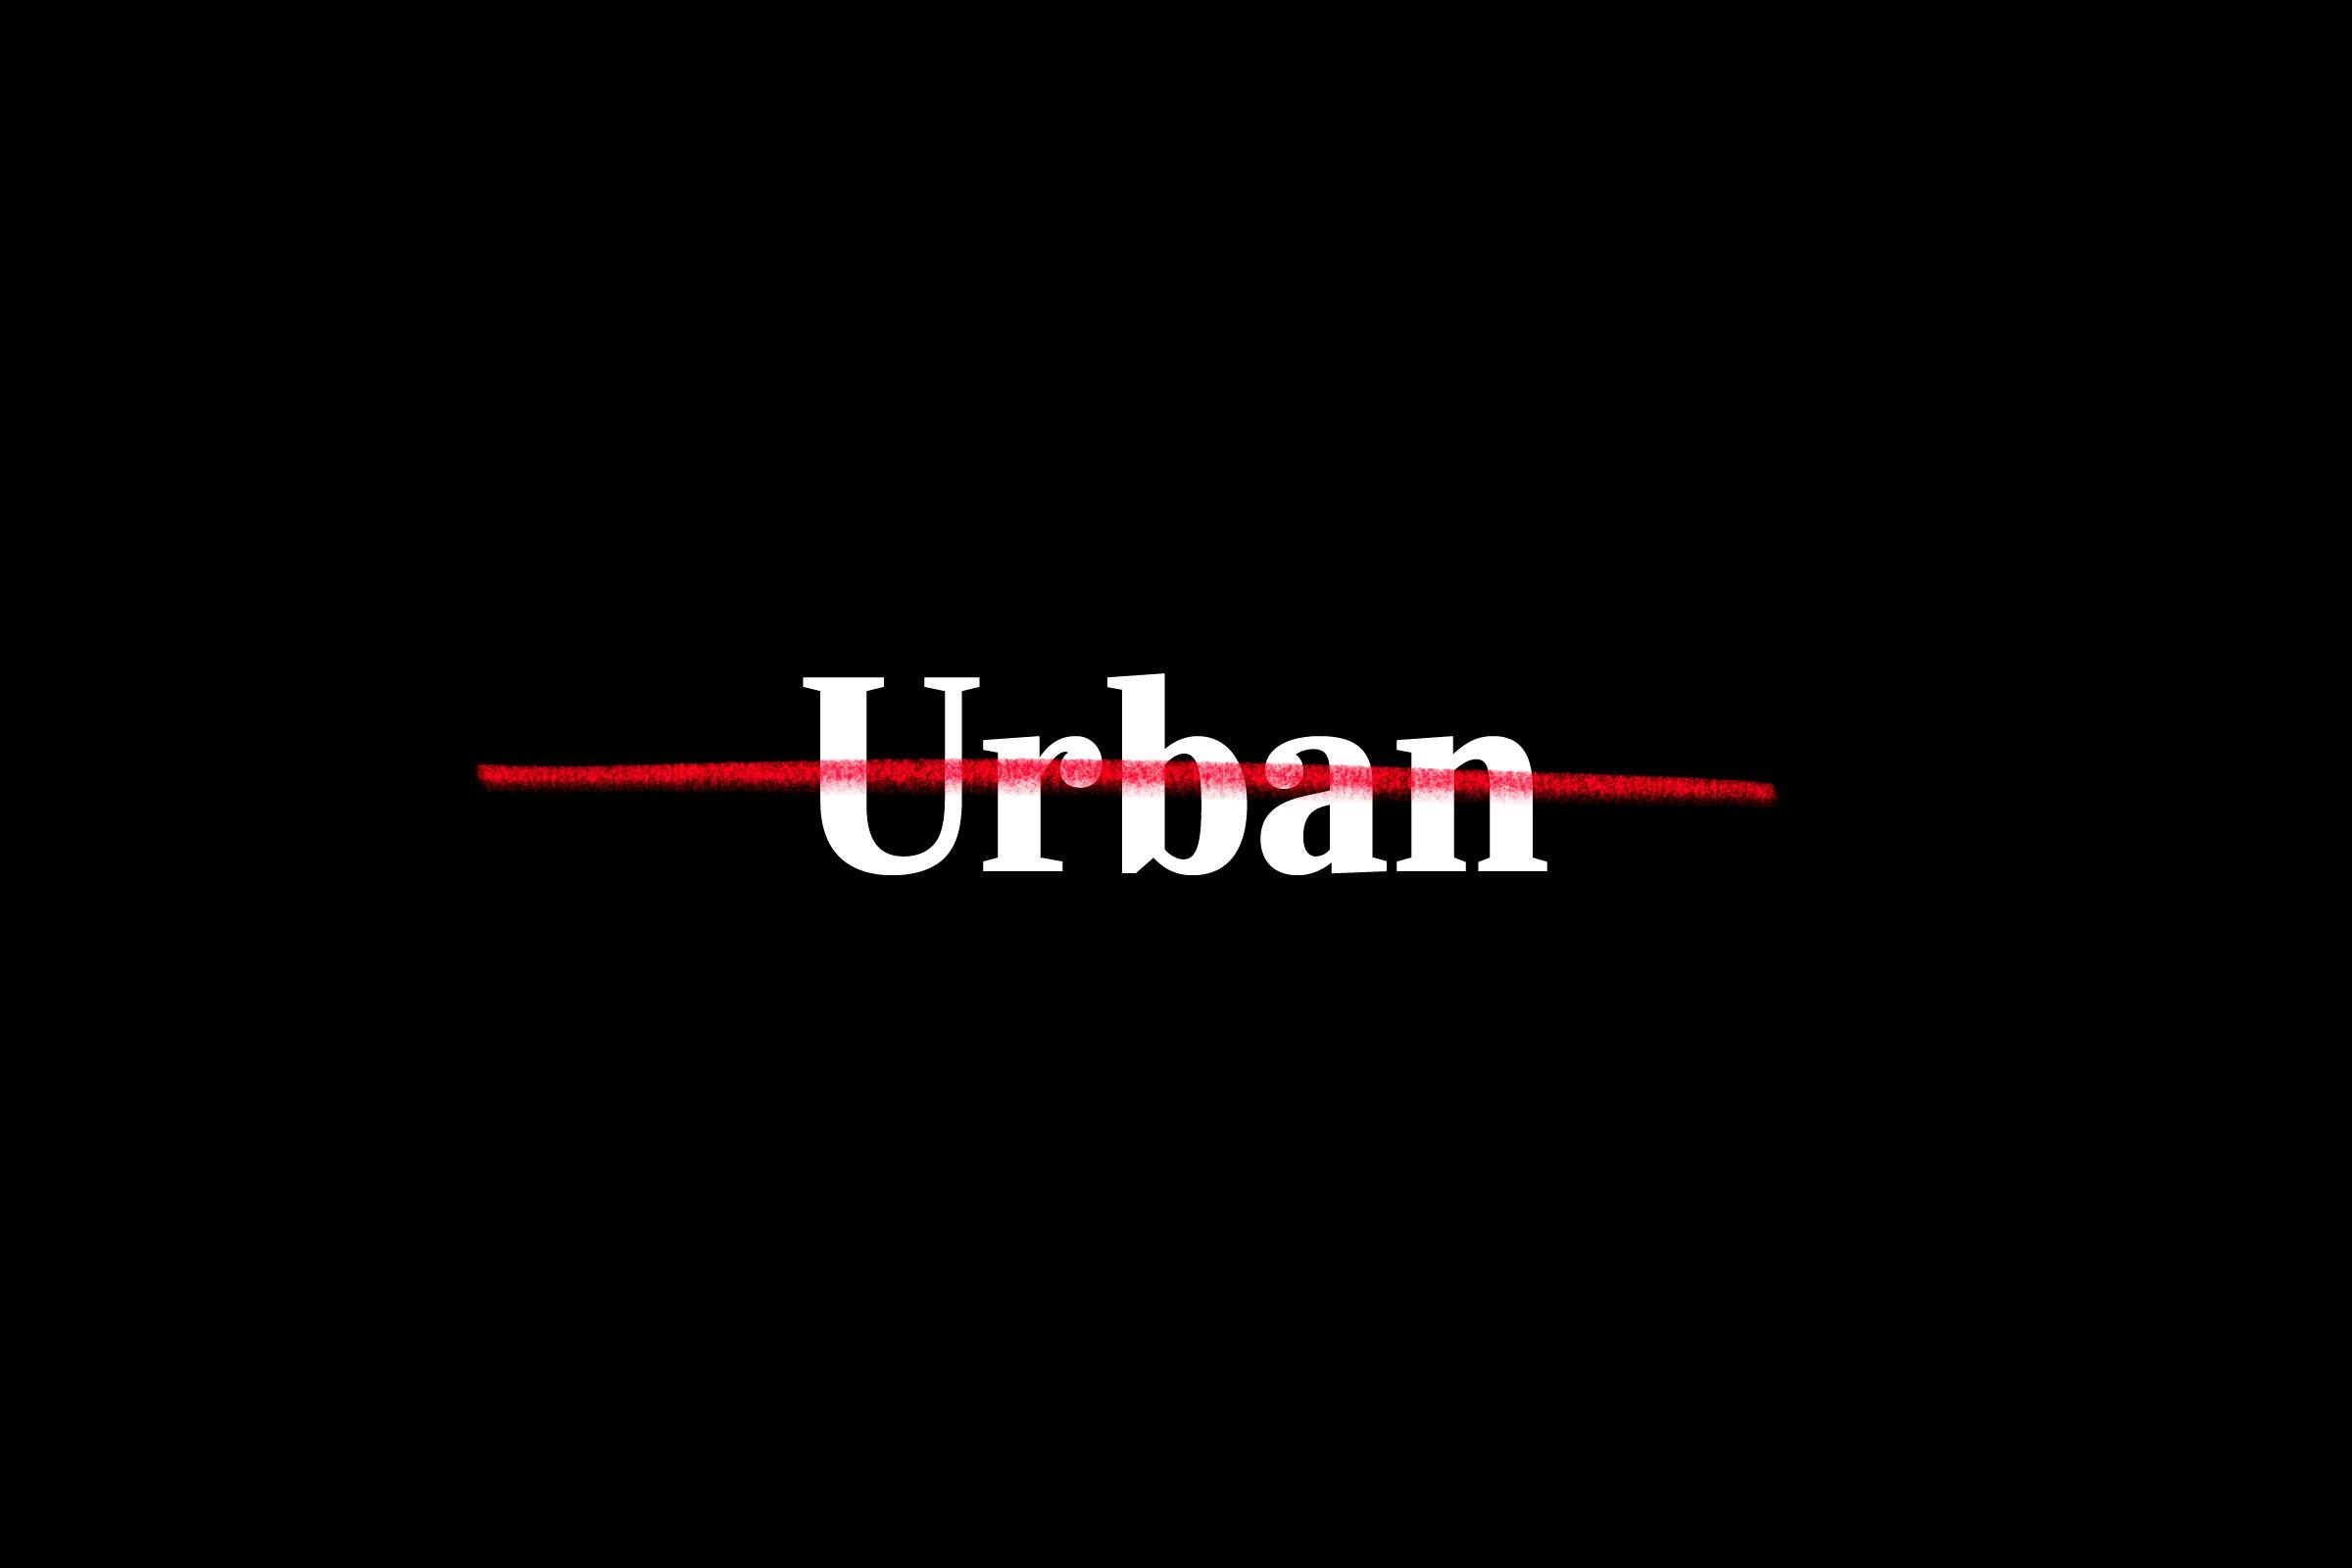 "urban" crossed out